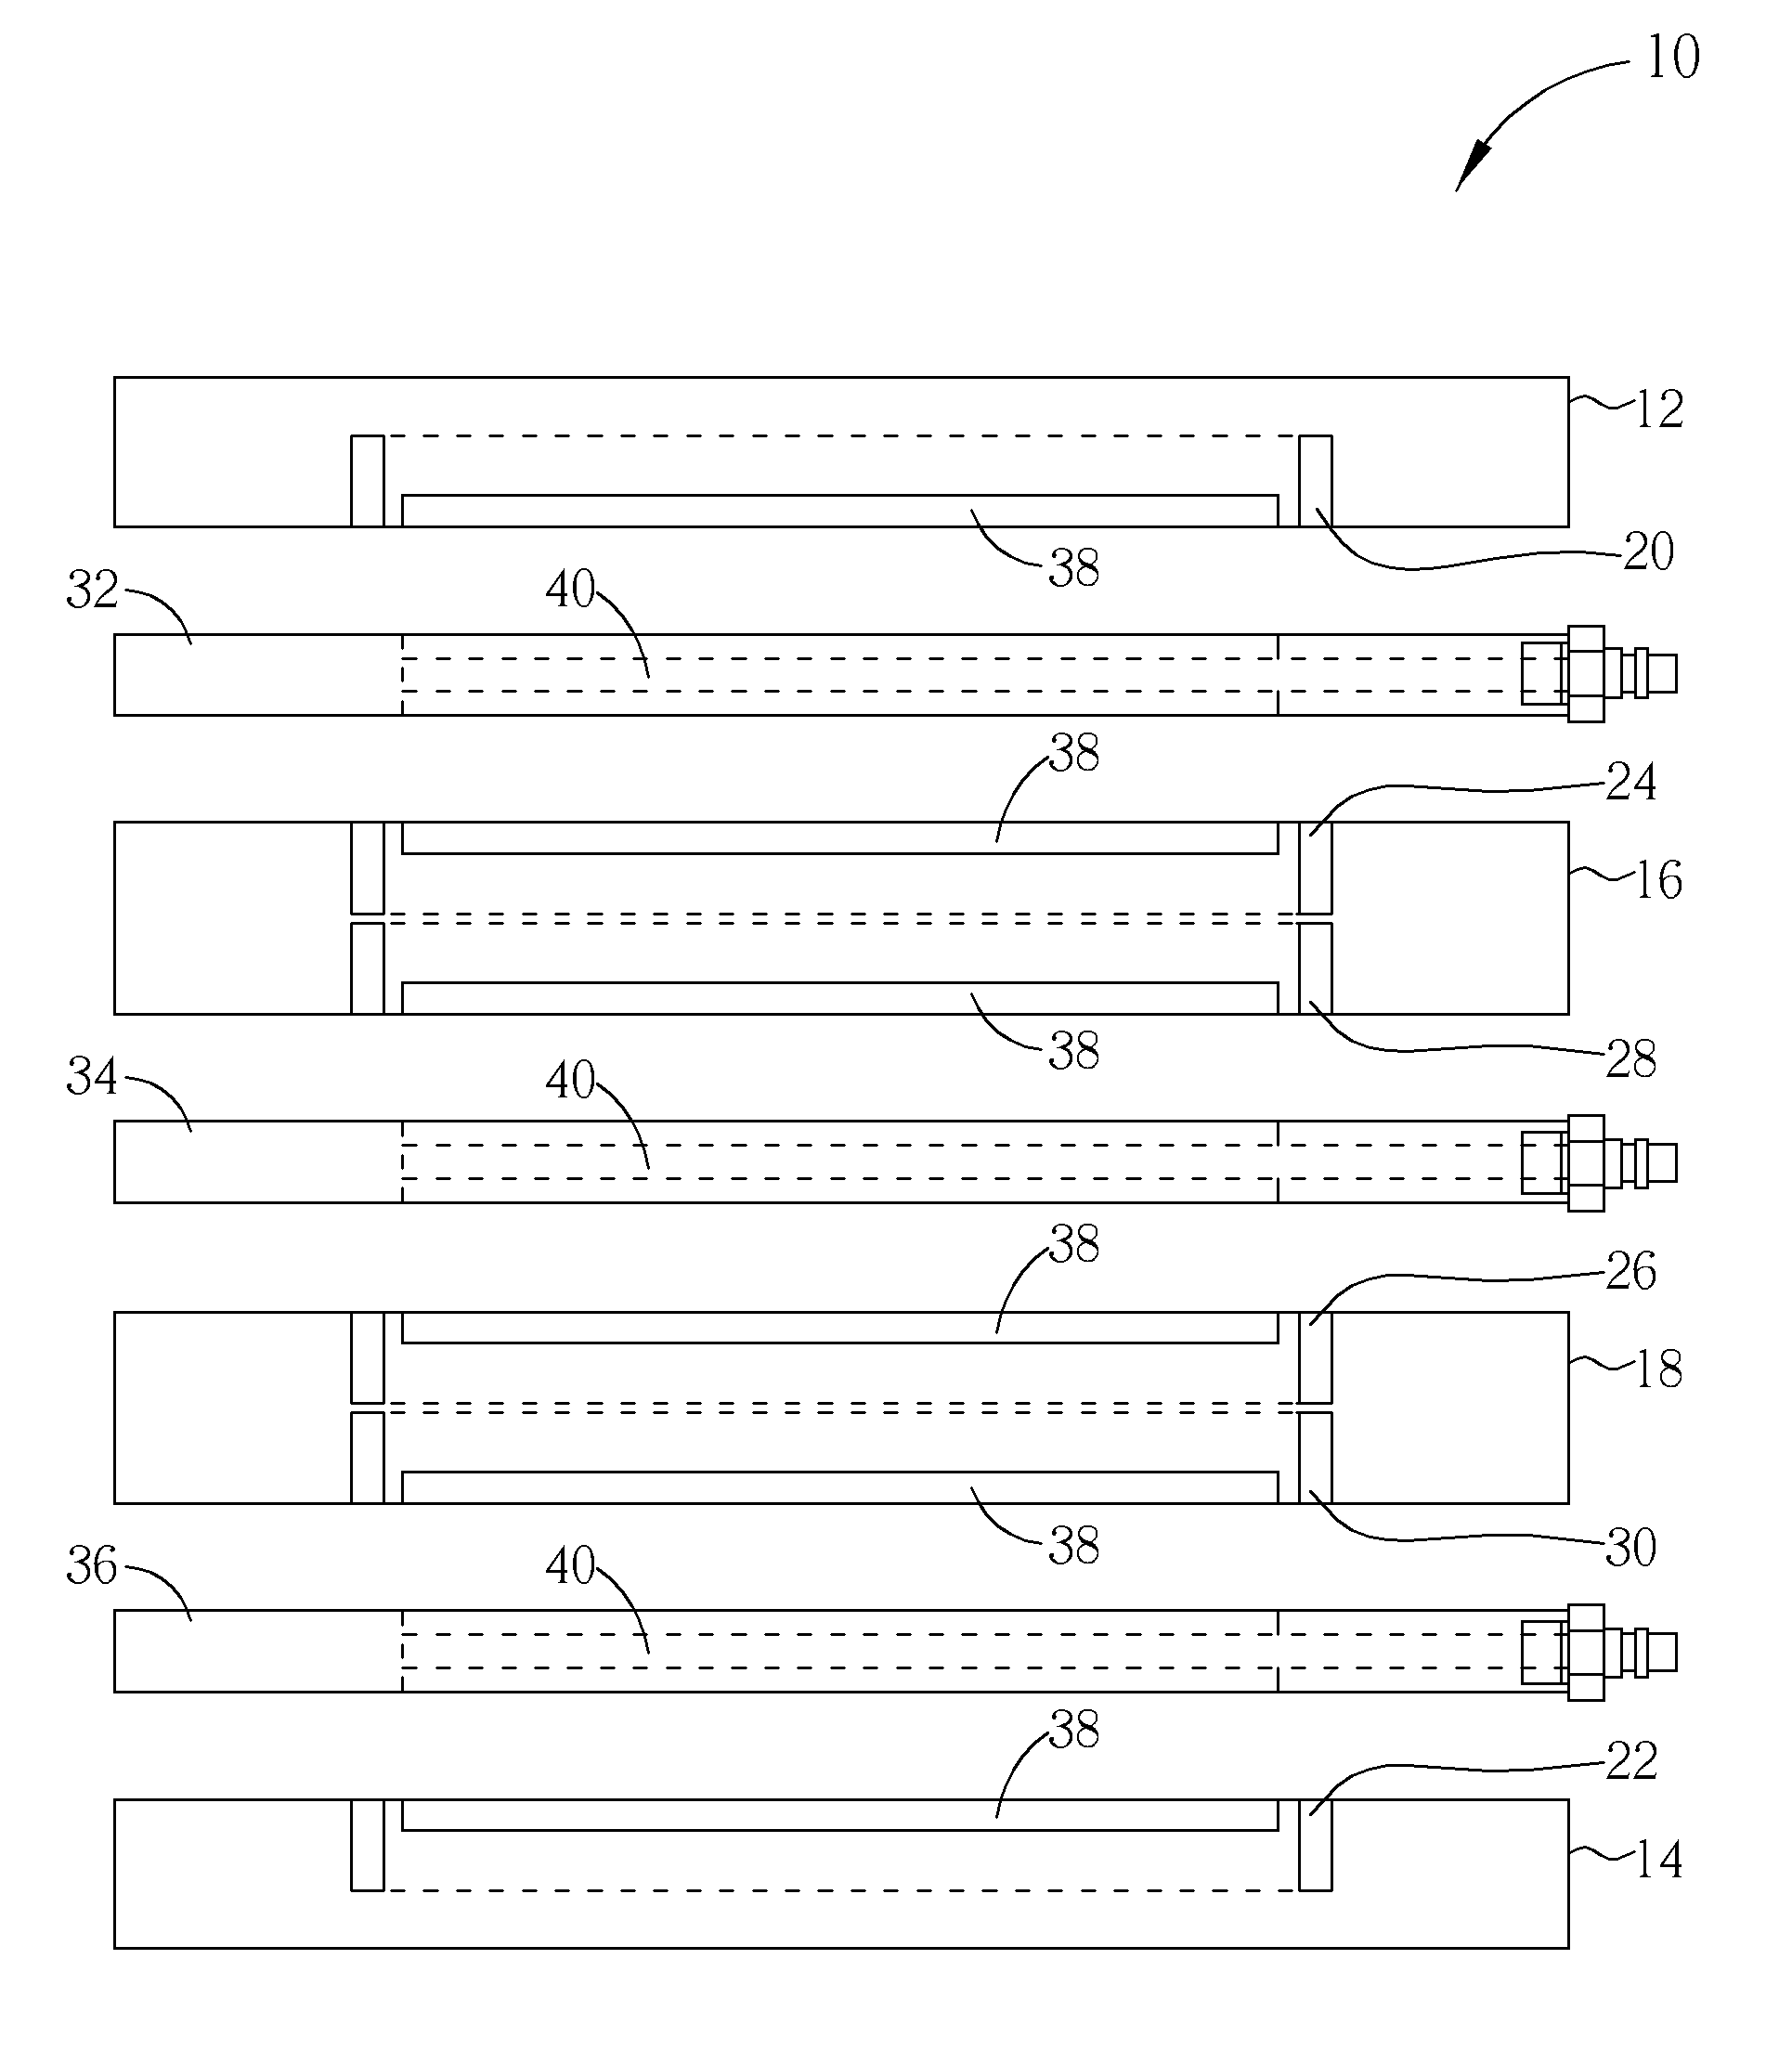 Molding apparatus and gas compression molding process